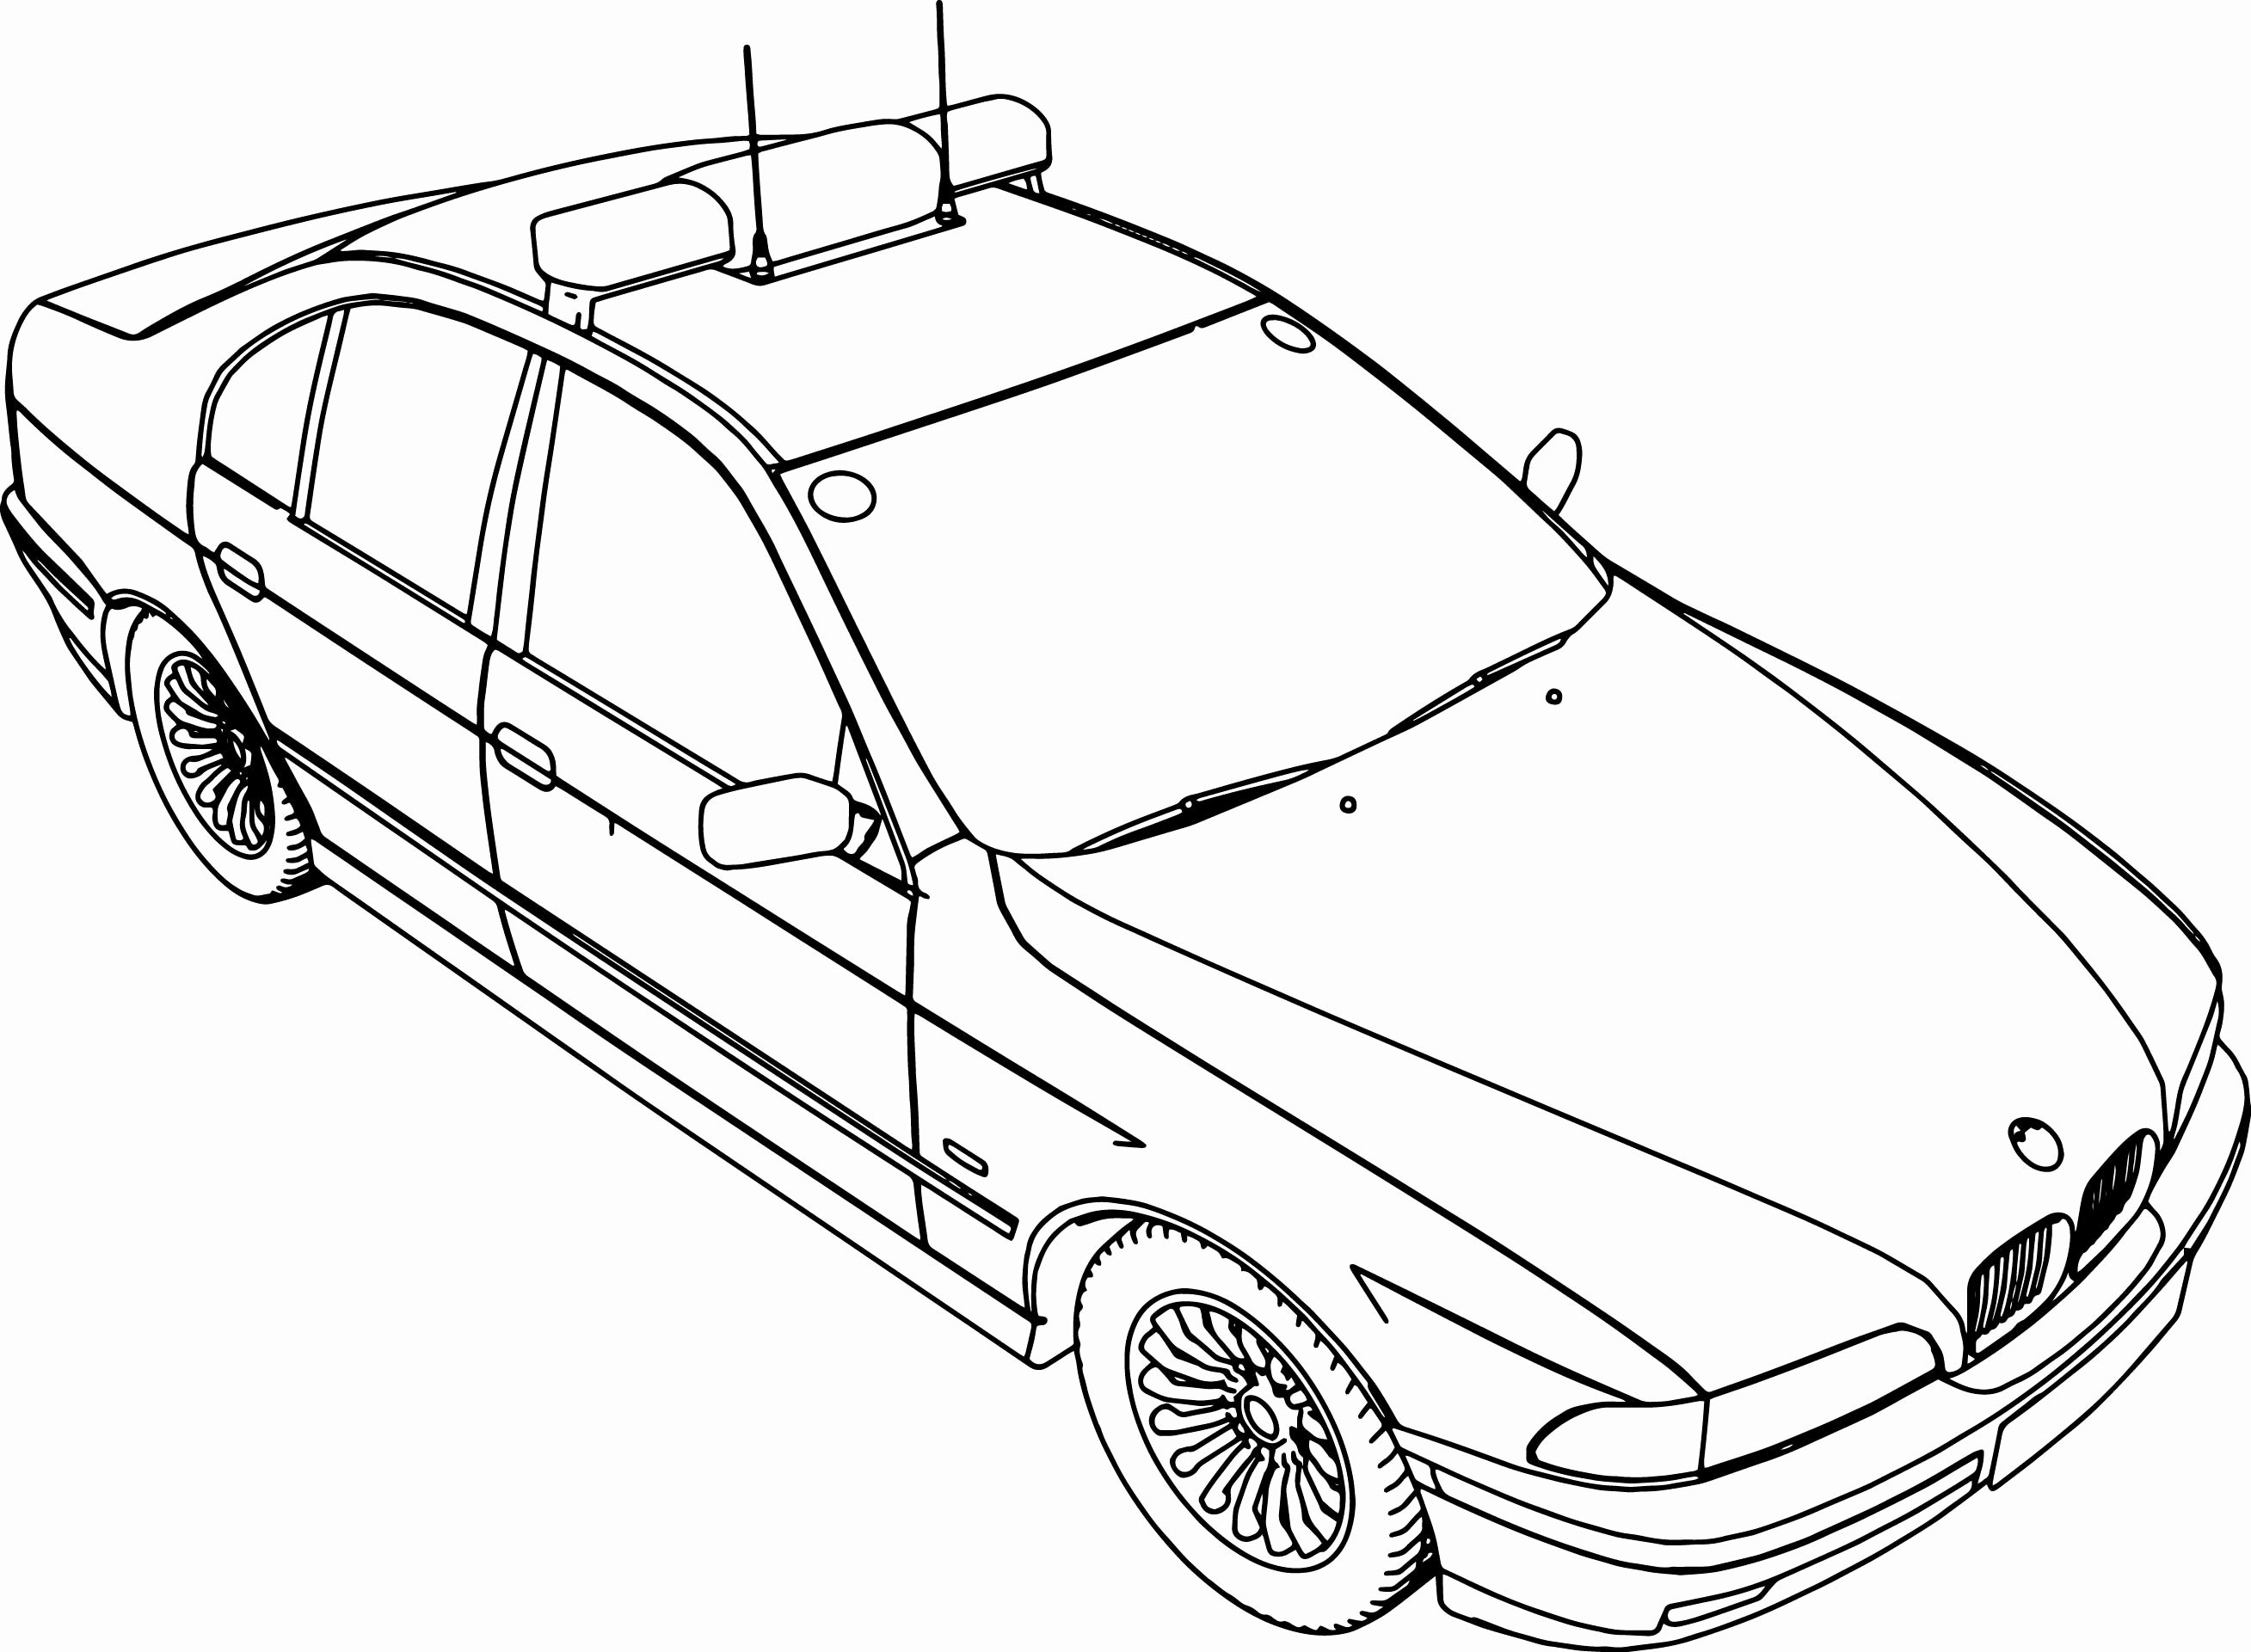 Bmw I8 Coloring Pages at GetColorings.com  Free printable colorings